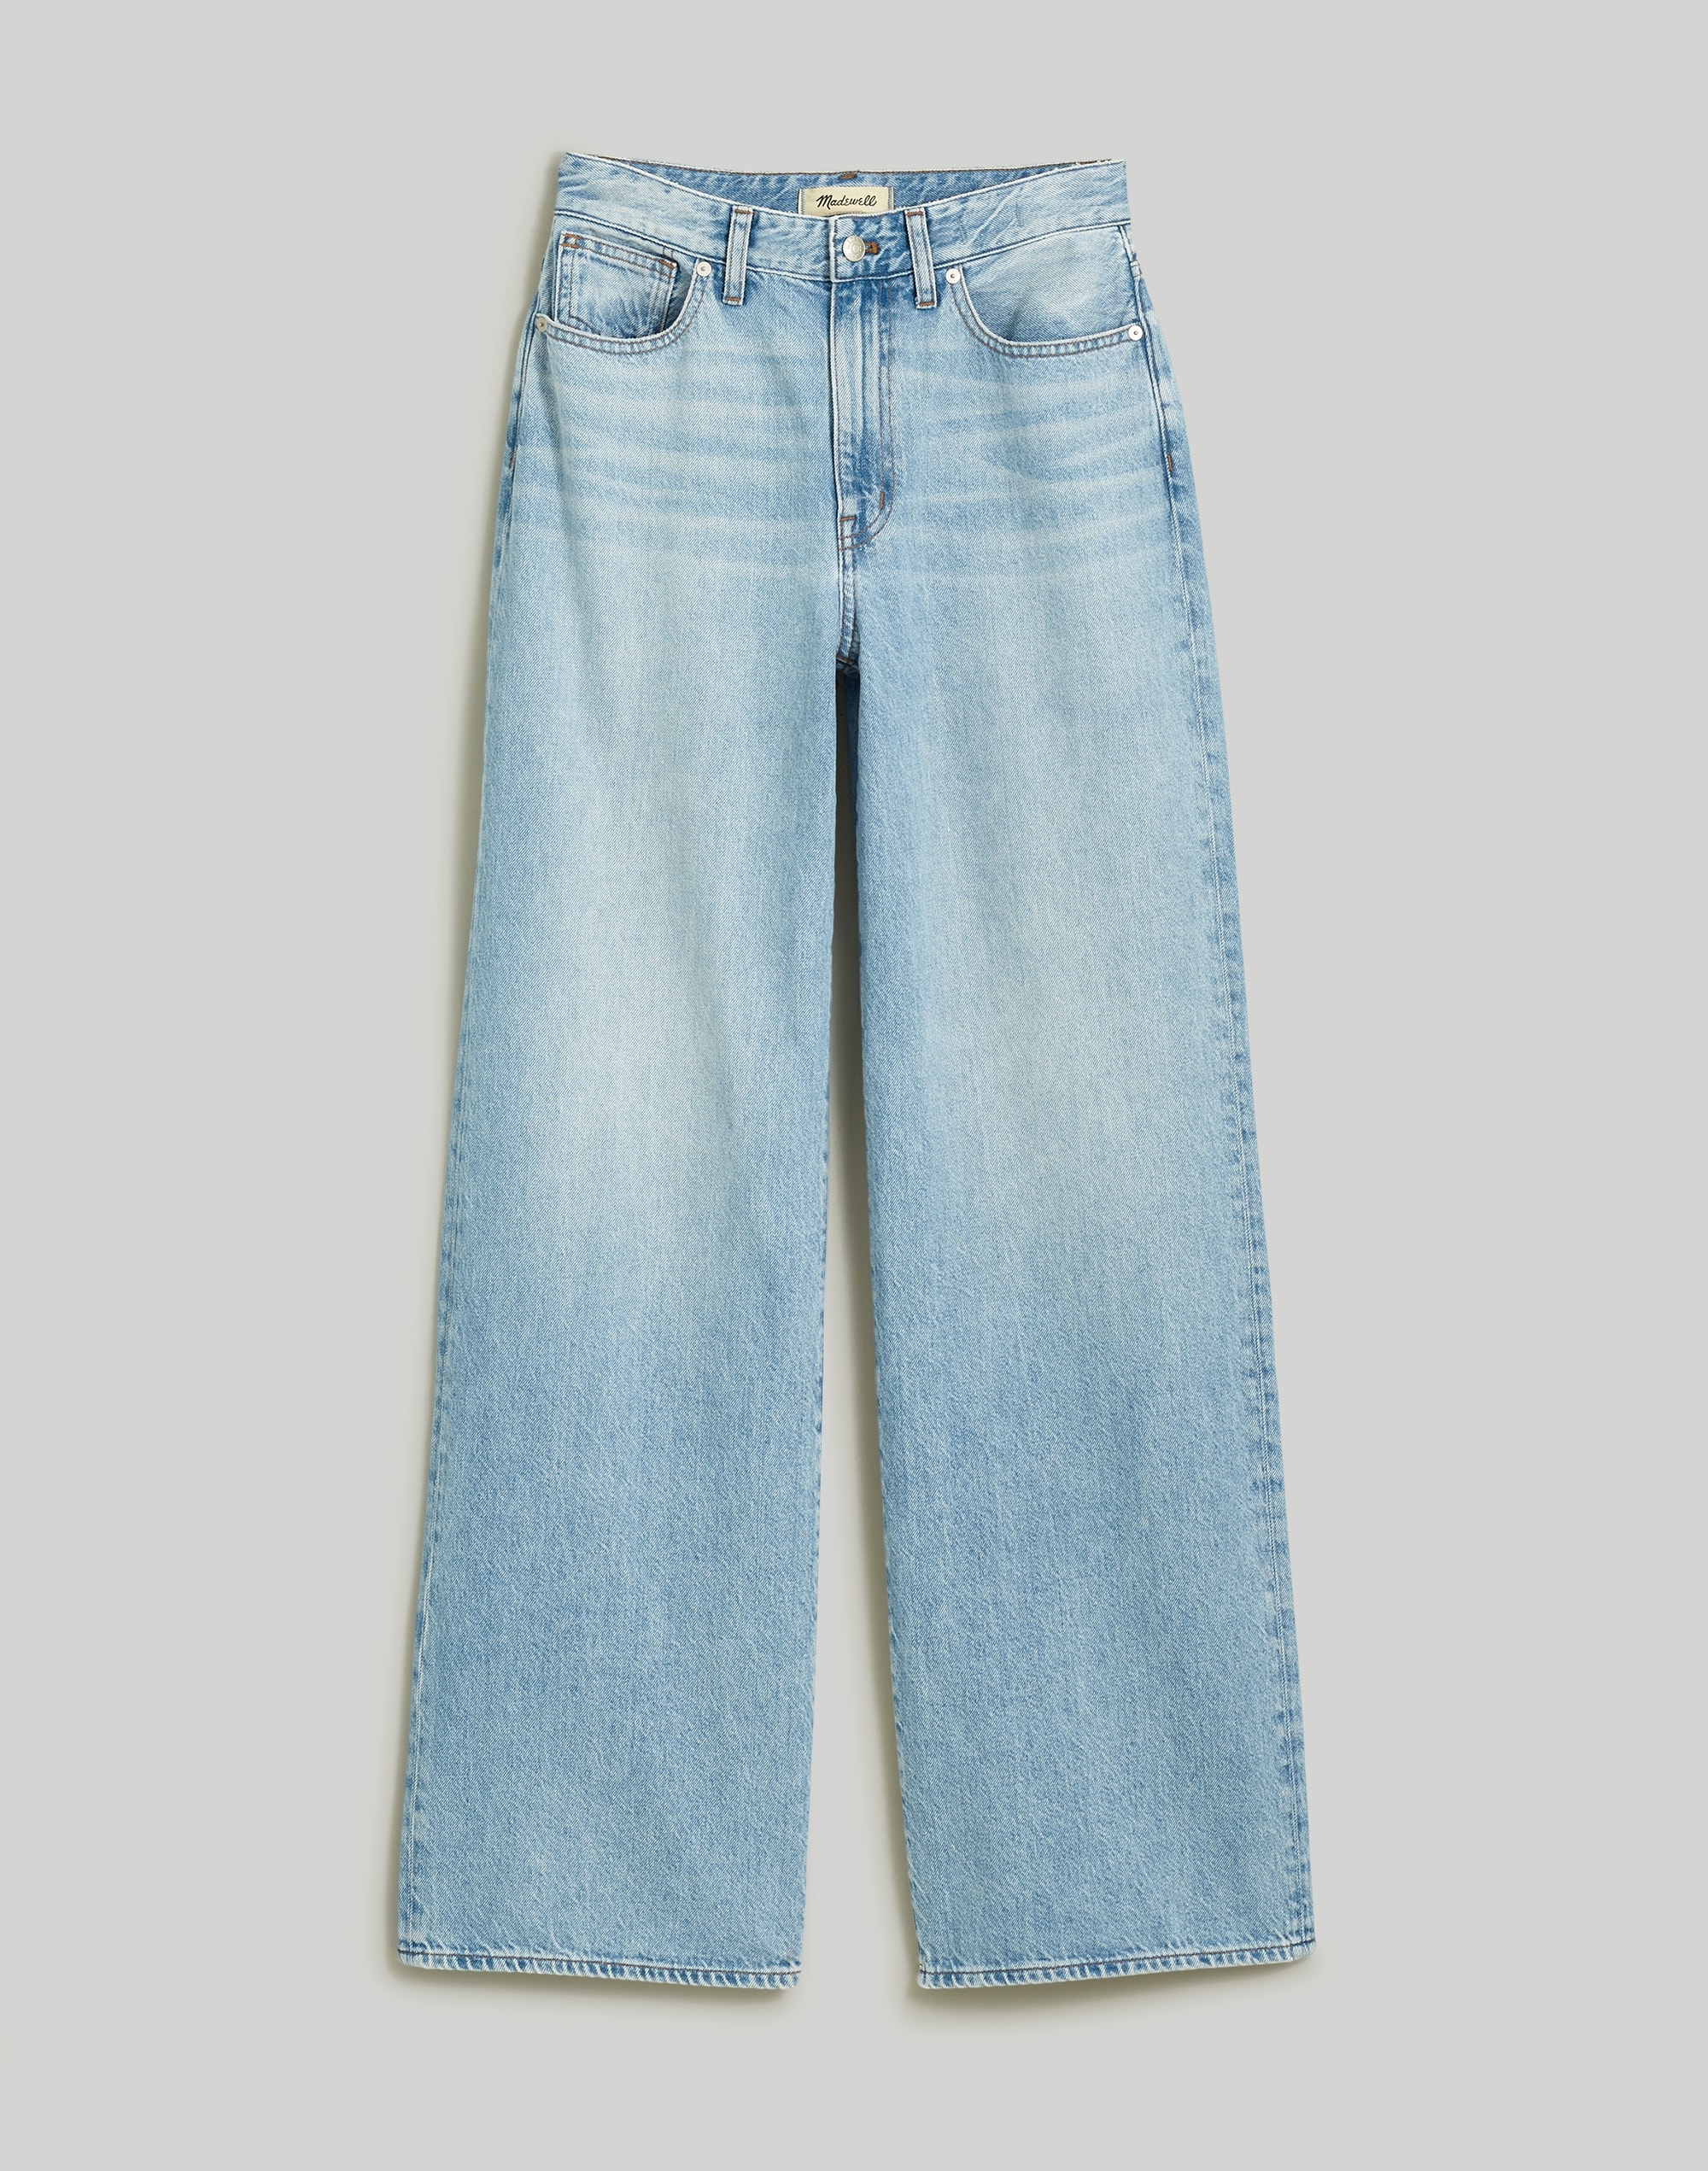 Petite Curvy Superwide-Leg Jeans in Ahern Wash: Airy Denim Edition